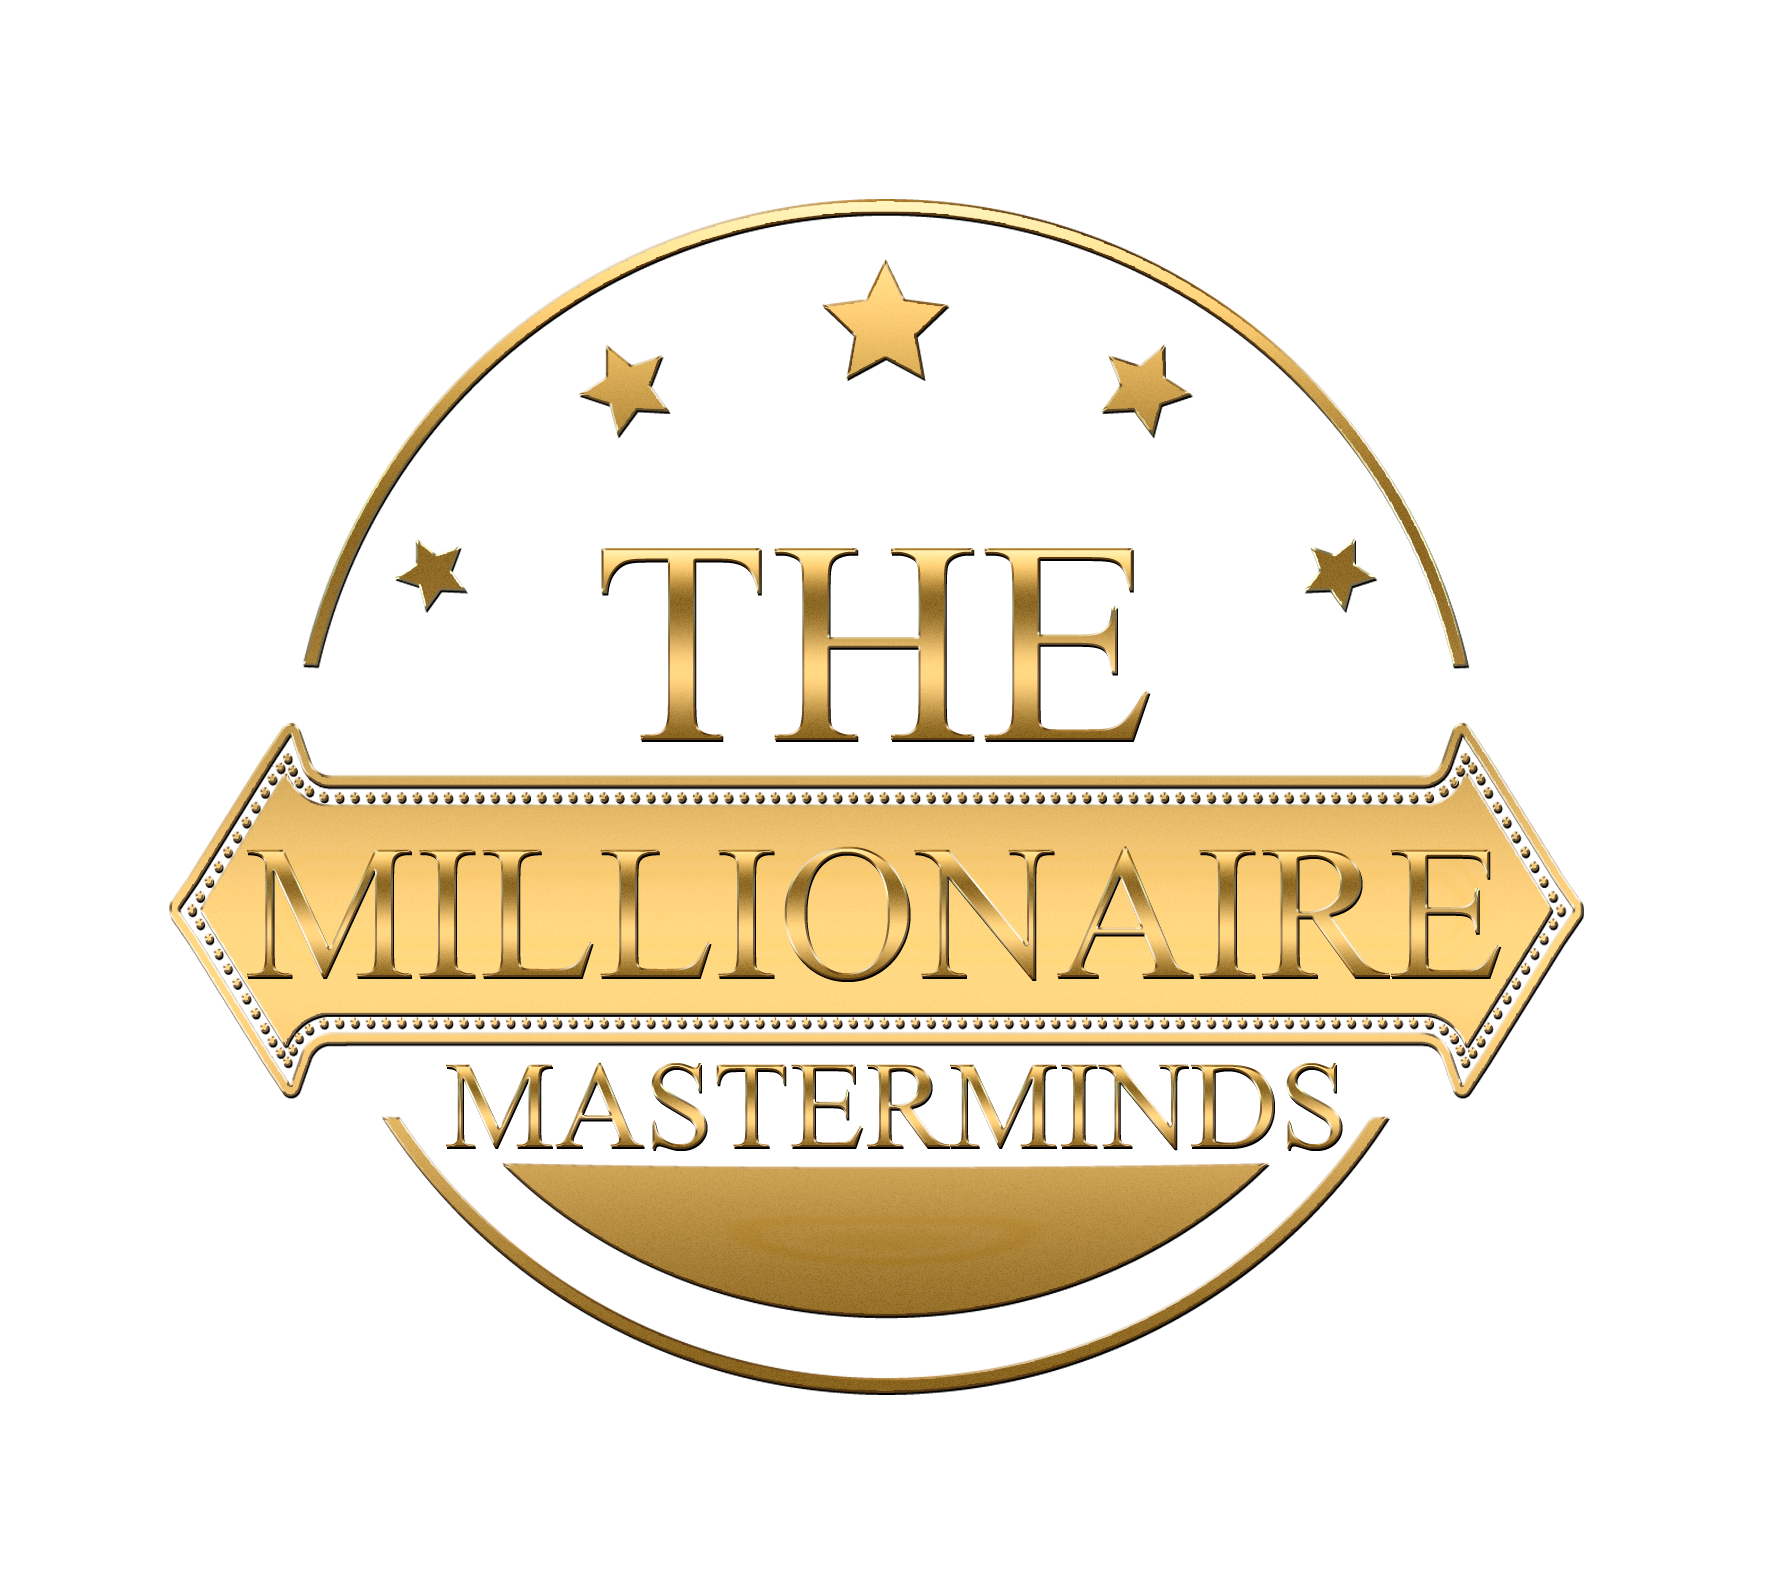 The Millionaire Masterminds Logo By Jknock1 The Millionaire Masterminds Logo By Jknock1 - Millionaire, Transparent background PNG HD thumbnail